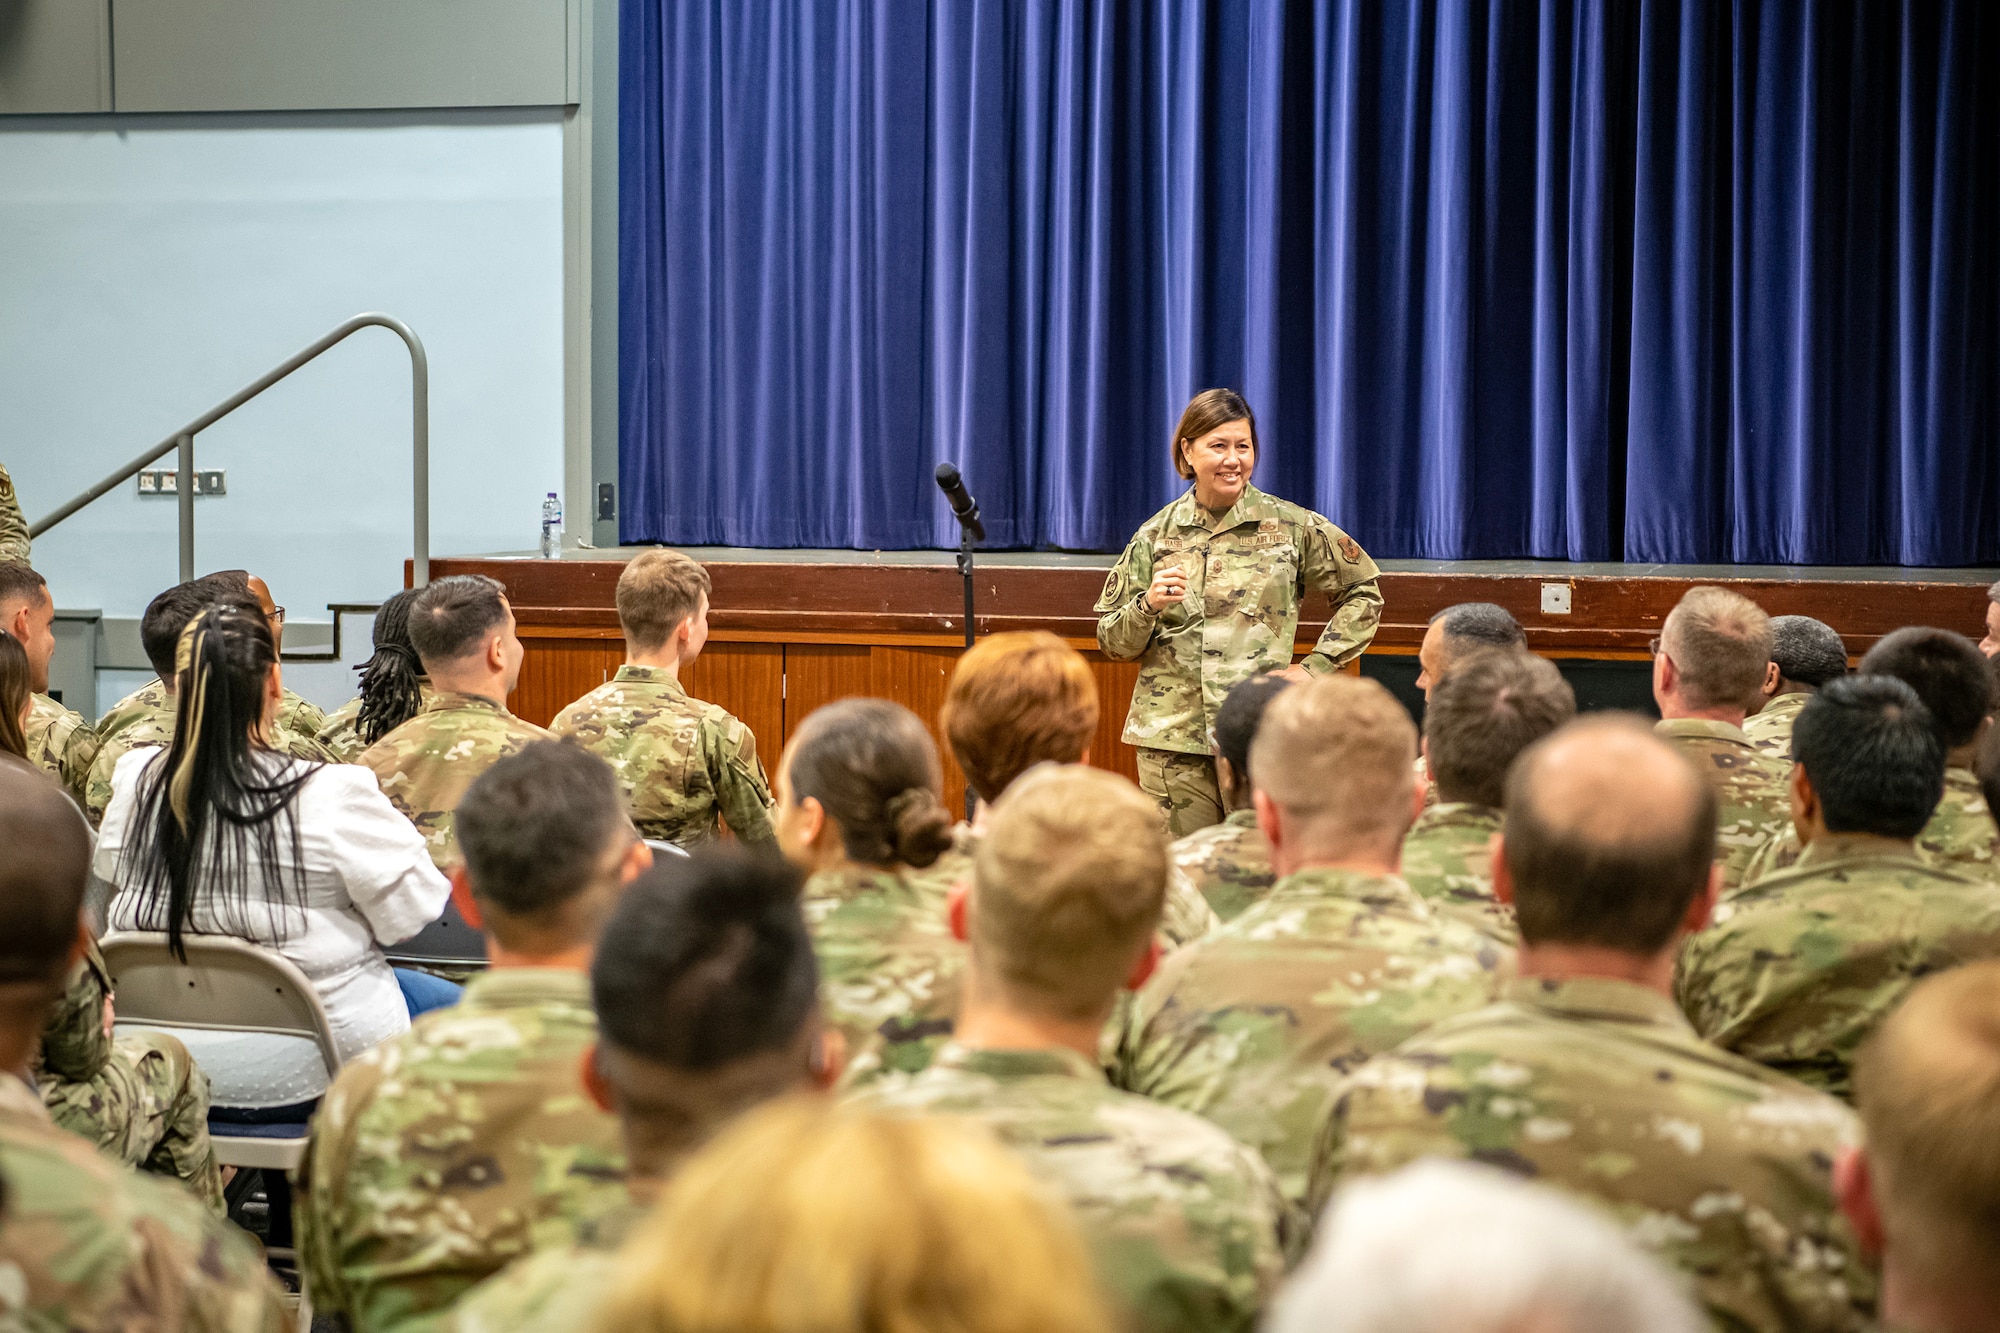 Chief Master Sgt. of the Air Force JoAnne S. Bass speaks about the future of the Air Force and its priorities with 501st Combat Support Wing members at RAF Croughton, England, July 12, 2023. The all-call covered the Air Force’s strategic priorities, the future of pay and benefits for Airmen and the importance of posturing for future warfighting operations. Additionally, the visit from CMSAF gave her the opportunity to speak with and recognize Airmen from across the 501 CSW. (U.S. Air Force photo by Staff Sgt. Eugene Oliver)